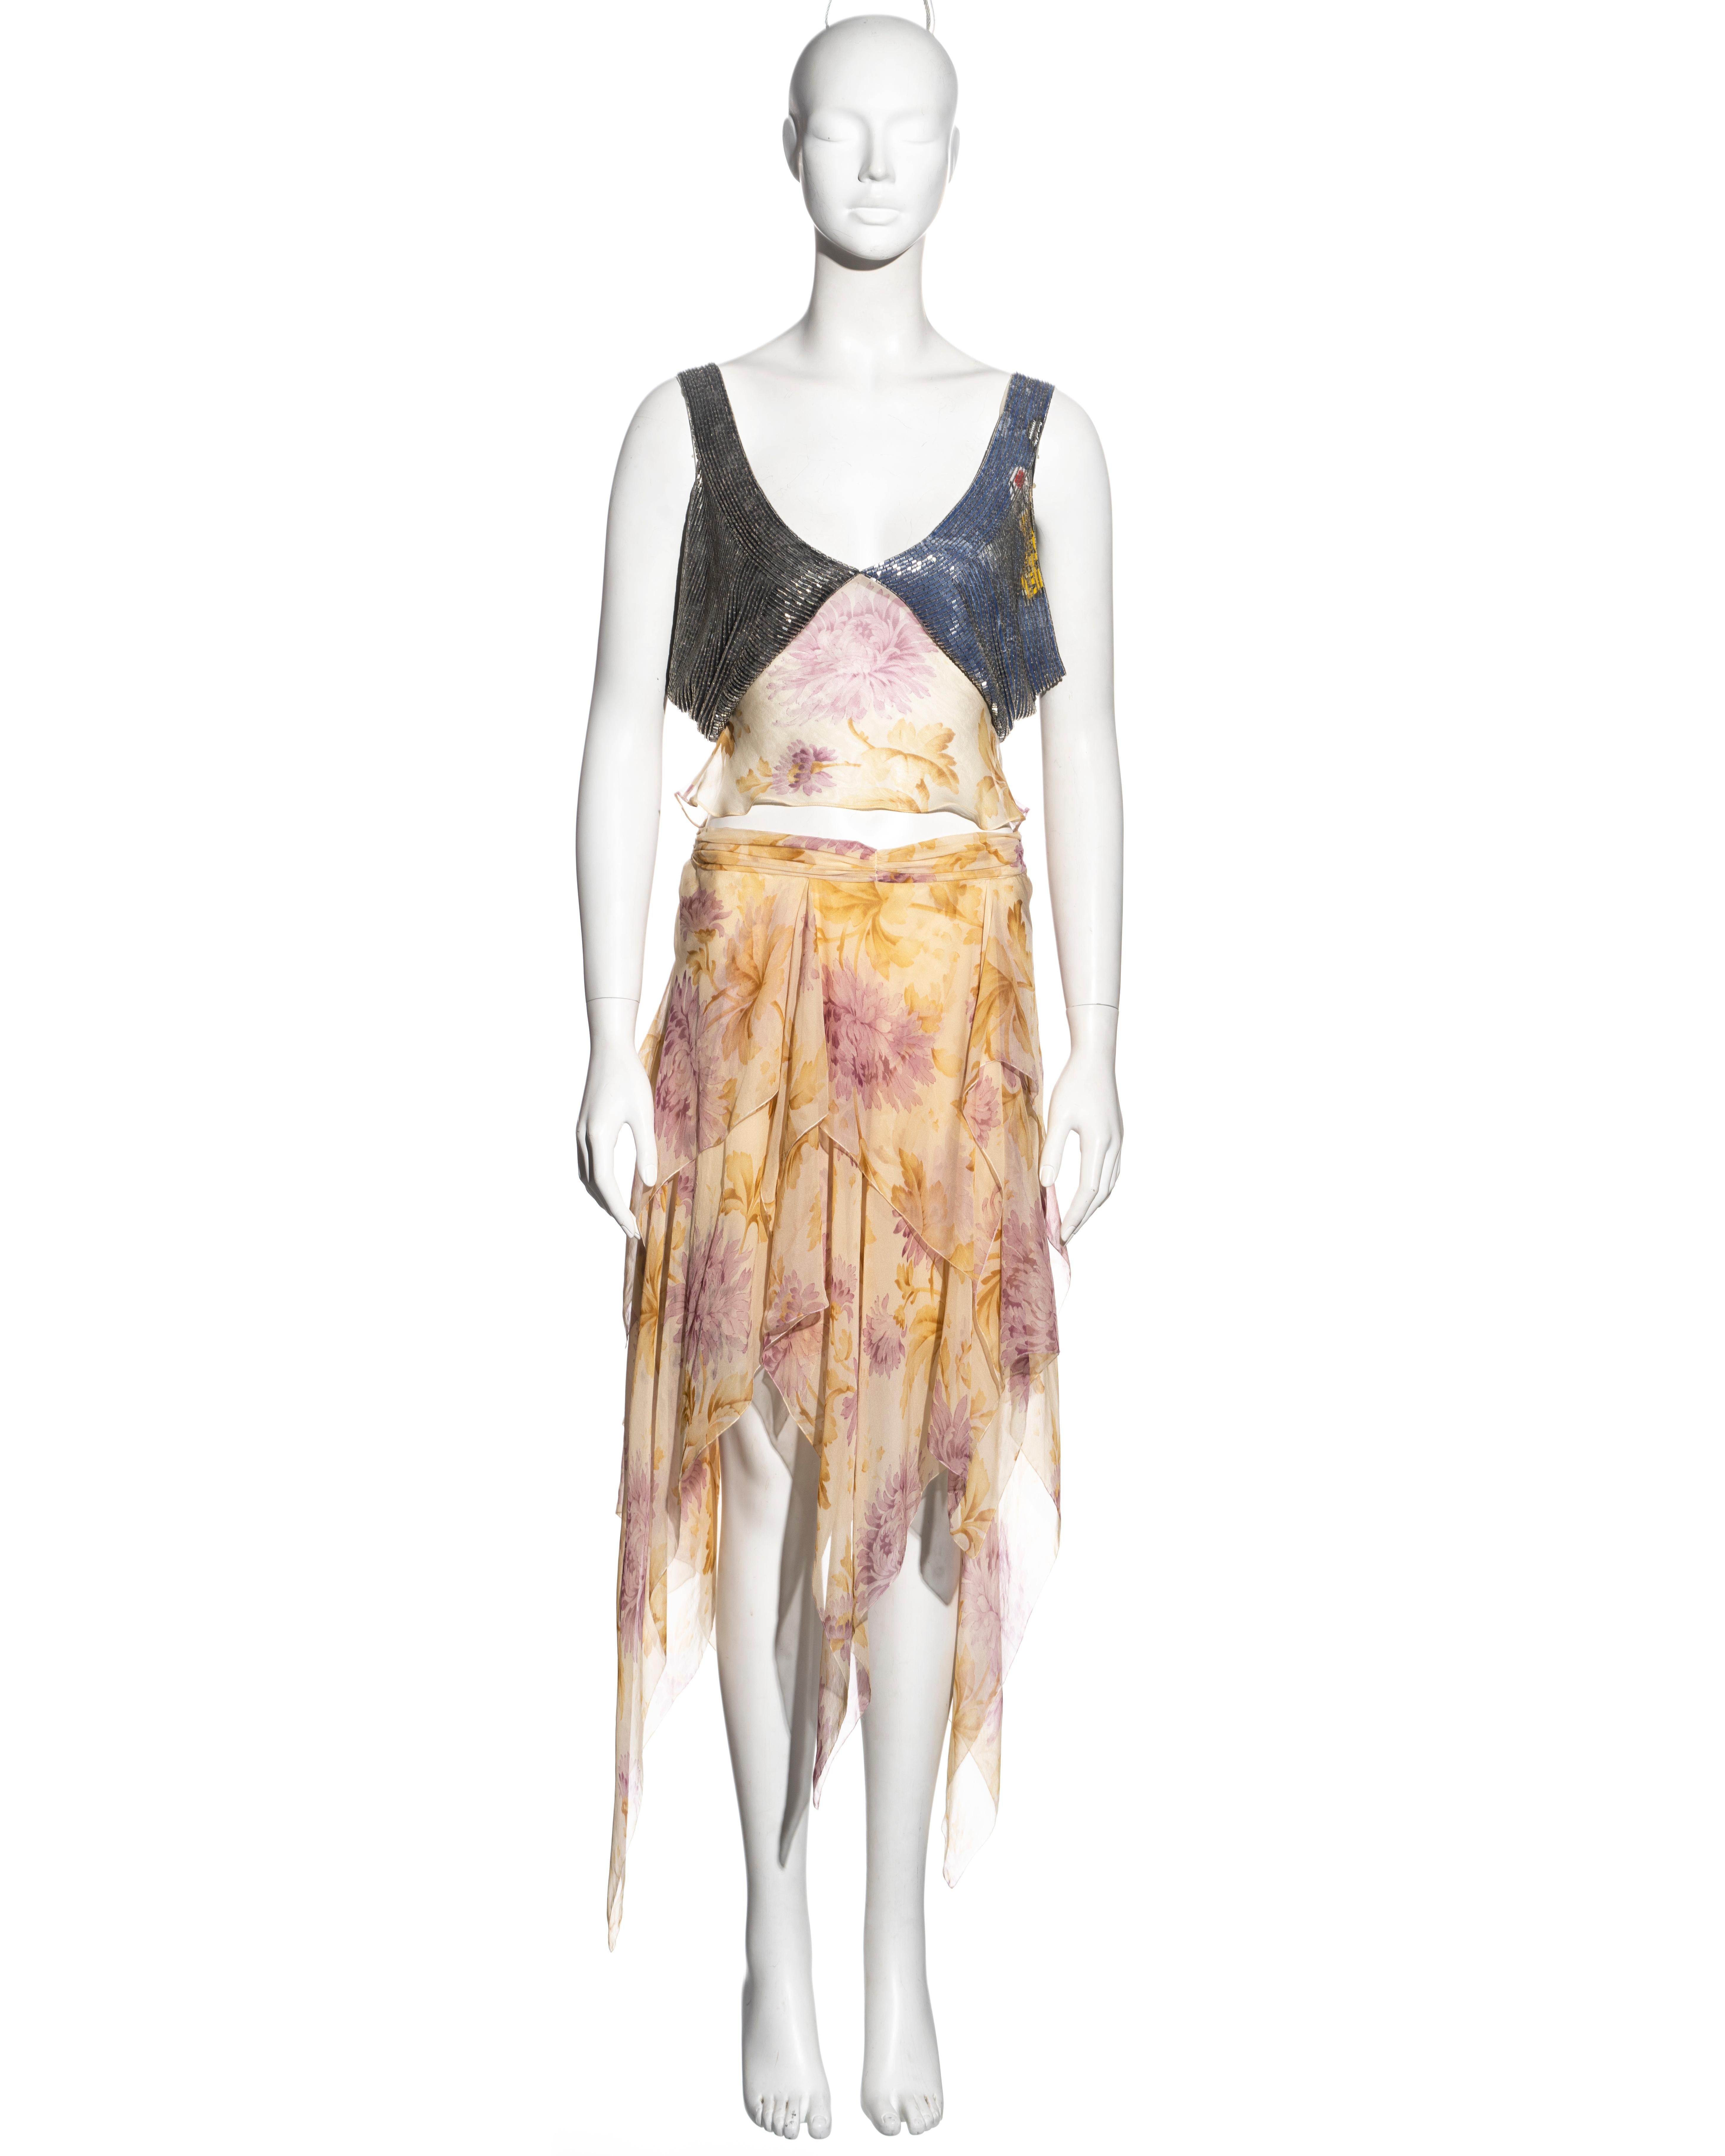 ▪ Christian Dior top and skirt set
▪ Designed by John Galliano
▪ Floral printed silk chiffon in shades of cream, pink and brown
▪ Top with bugle beads sewn over denim-printed silk 
▪ Matching multi-layered skirt with handkerchief hem 
▪ Top: FR 40 -